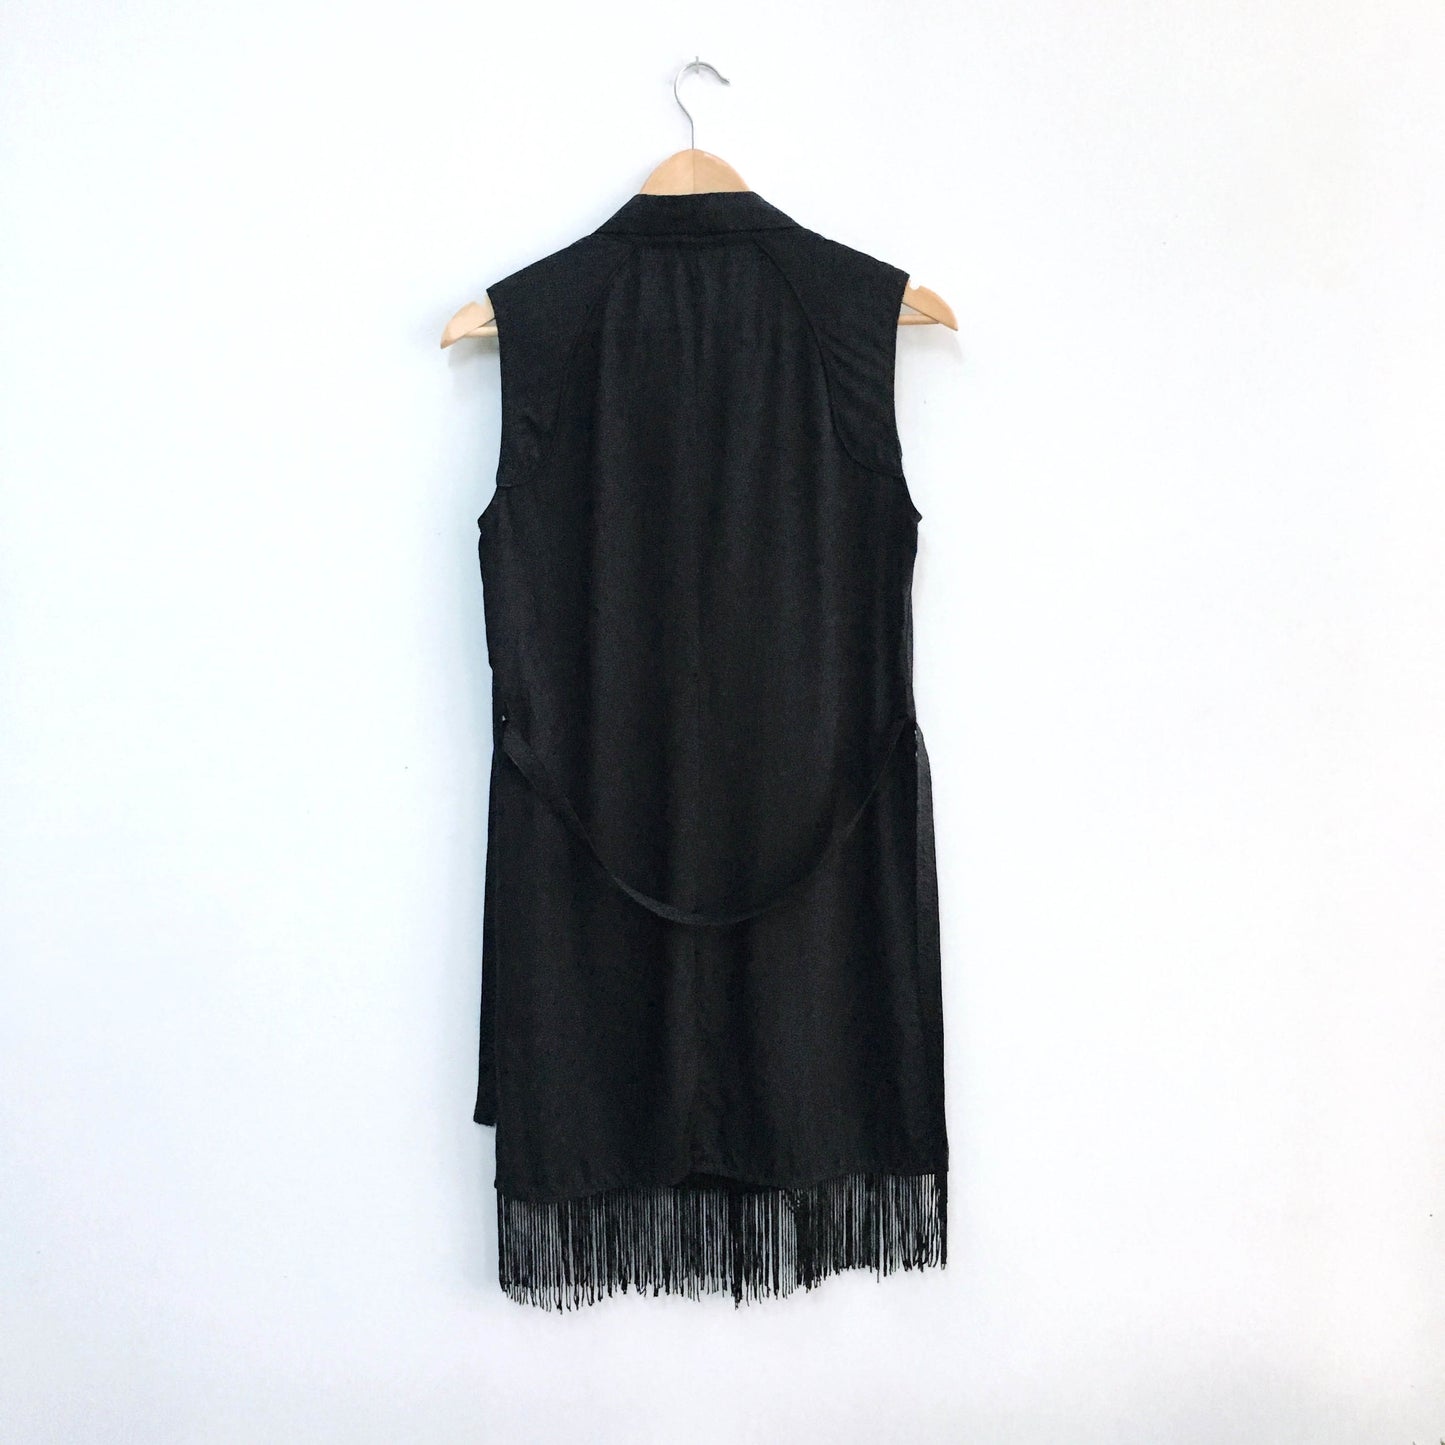 Diesel Shirtdress with Fringe - size xs